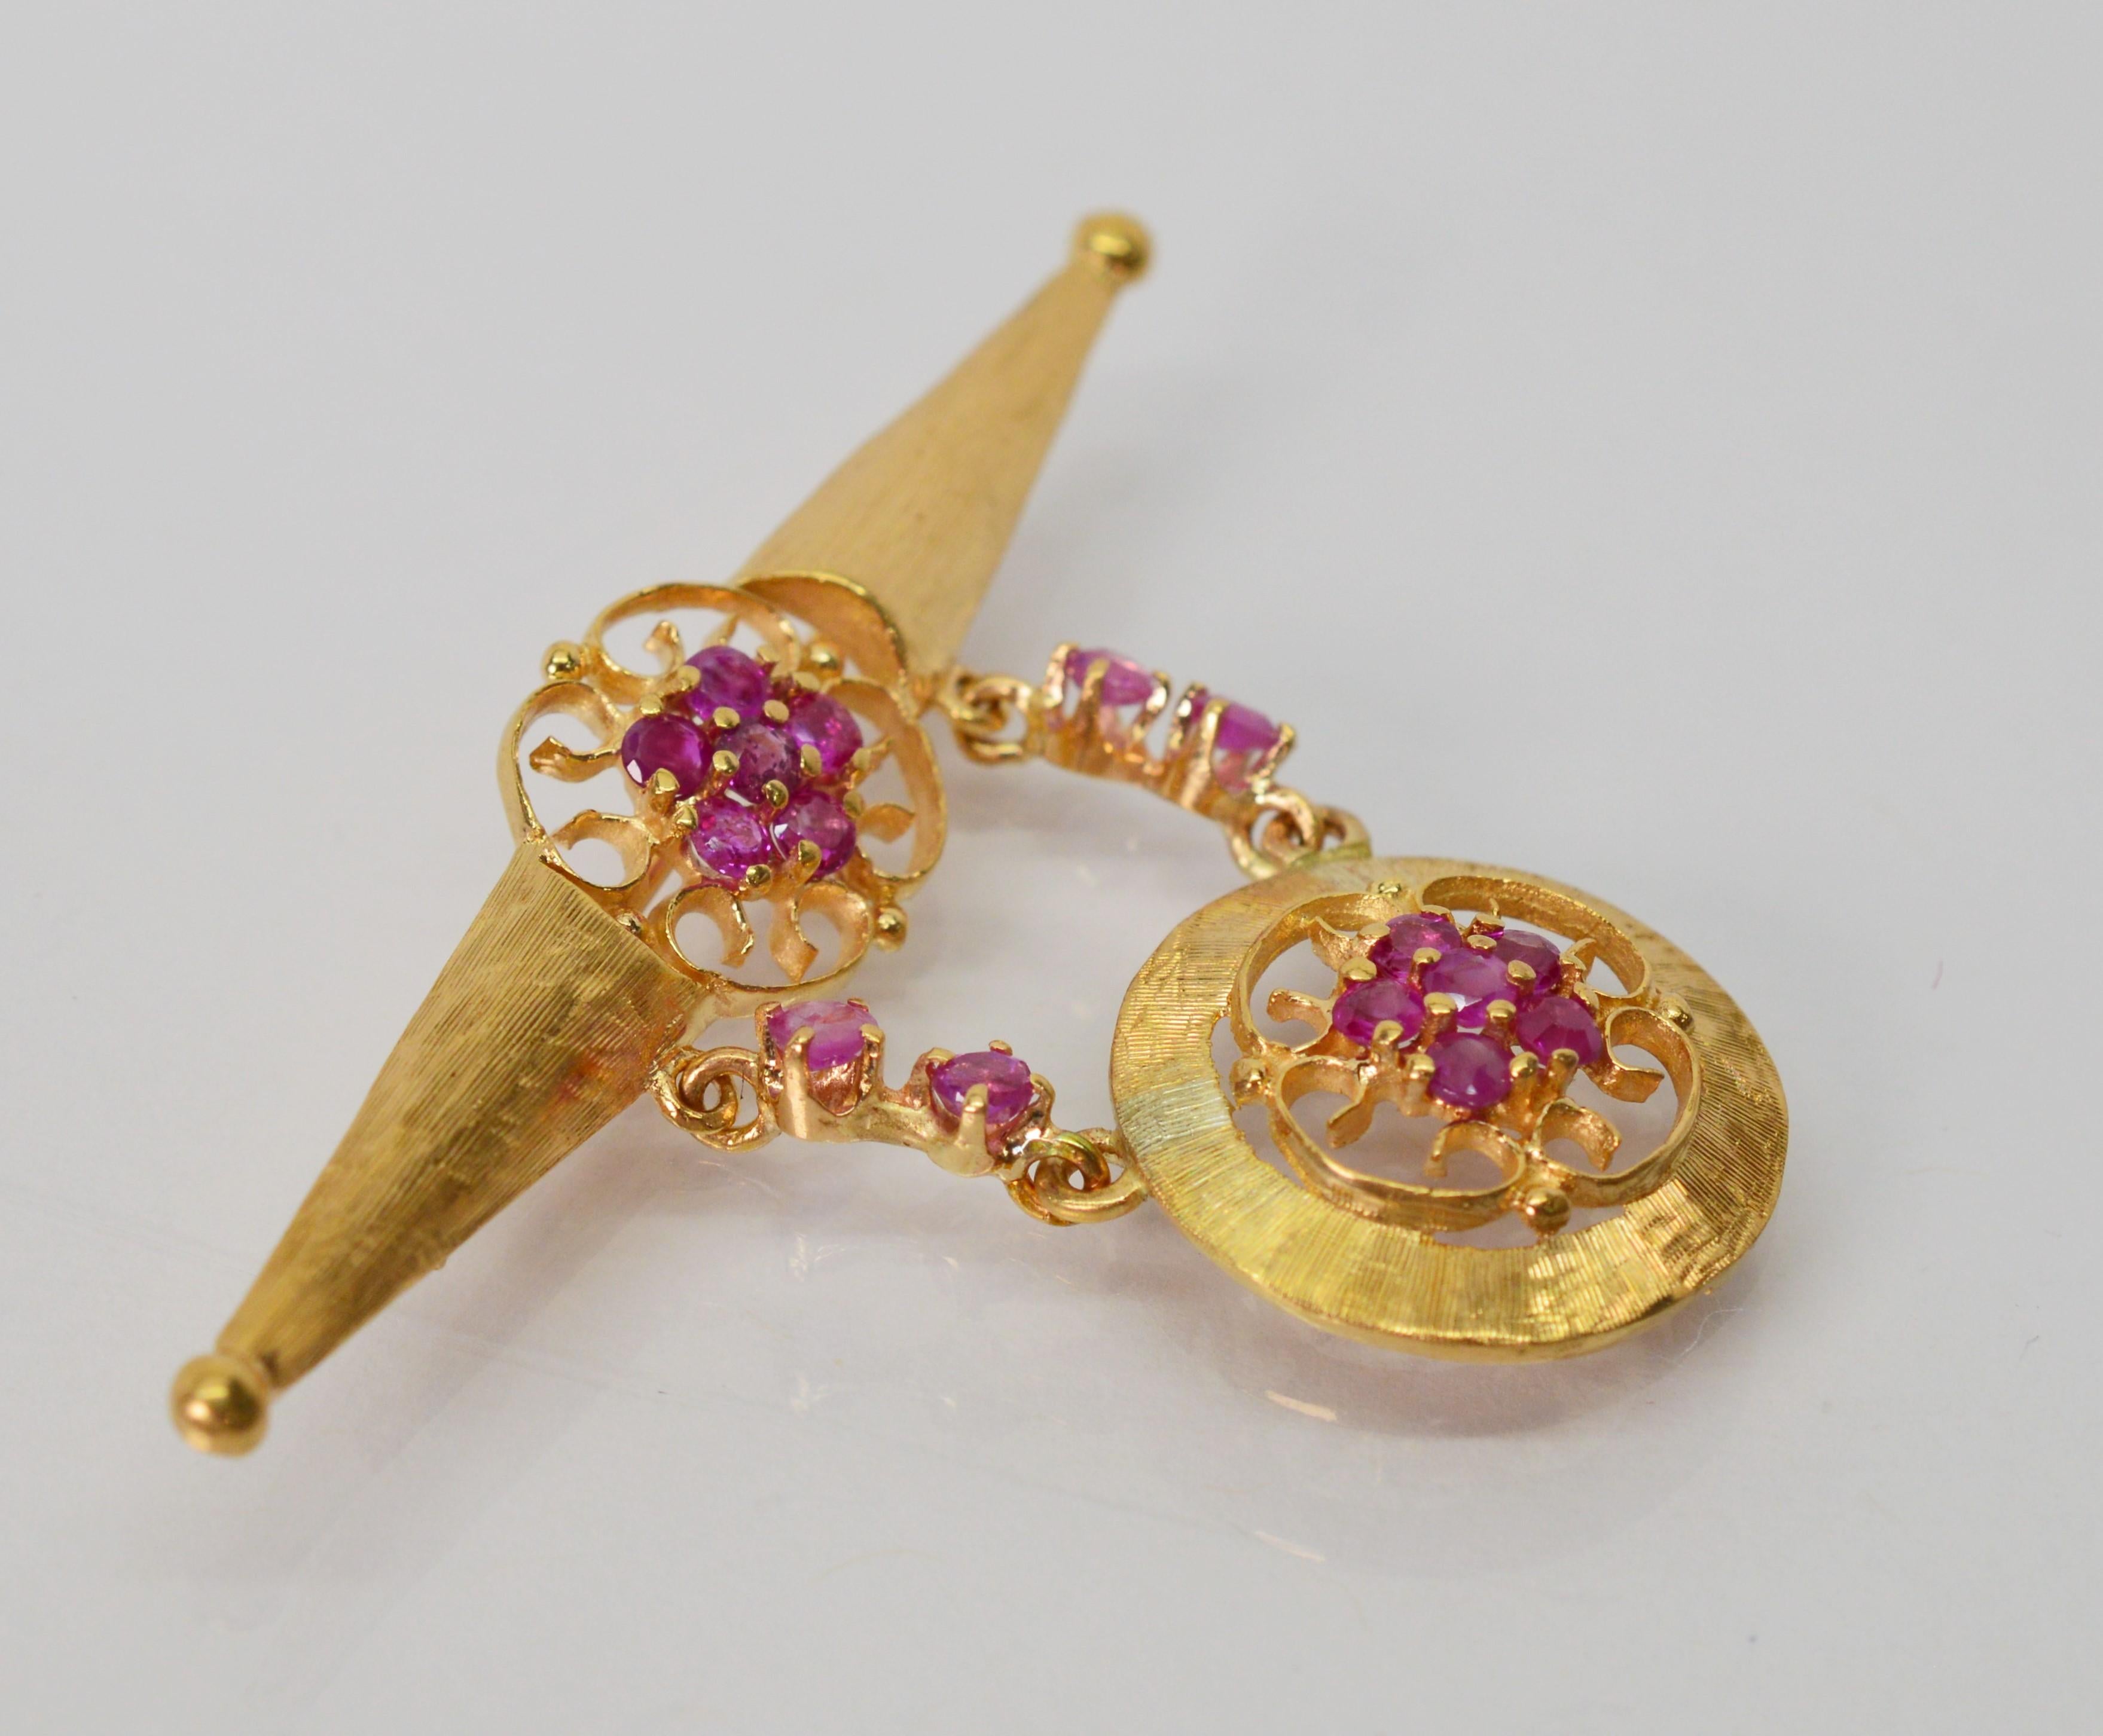 Floral ruby clusters framed in bright gold filigree soften the line of this romantic Art Deco fourteen karat 14K yellow gold bar pin brooch. The geometric bar pin hosts a suspended matching ruby floral charm in a round medallion shape  The top bar